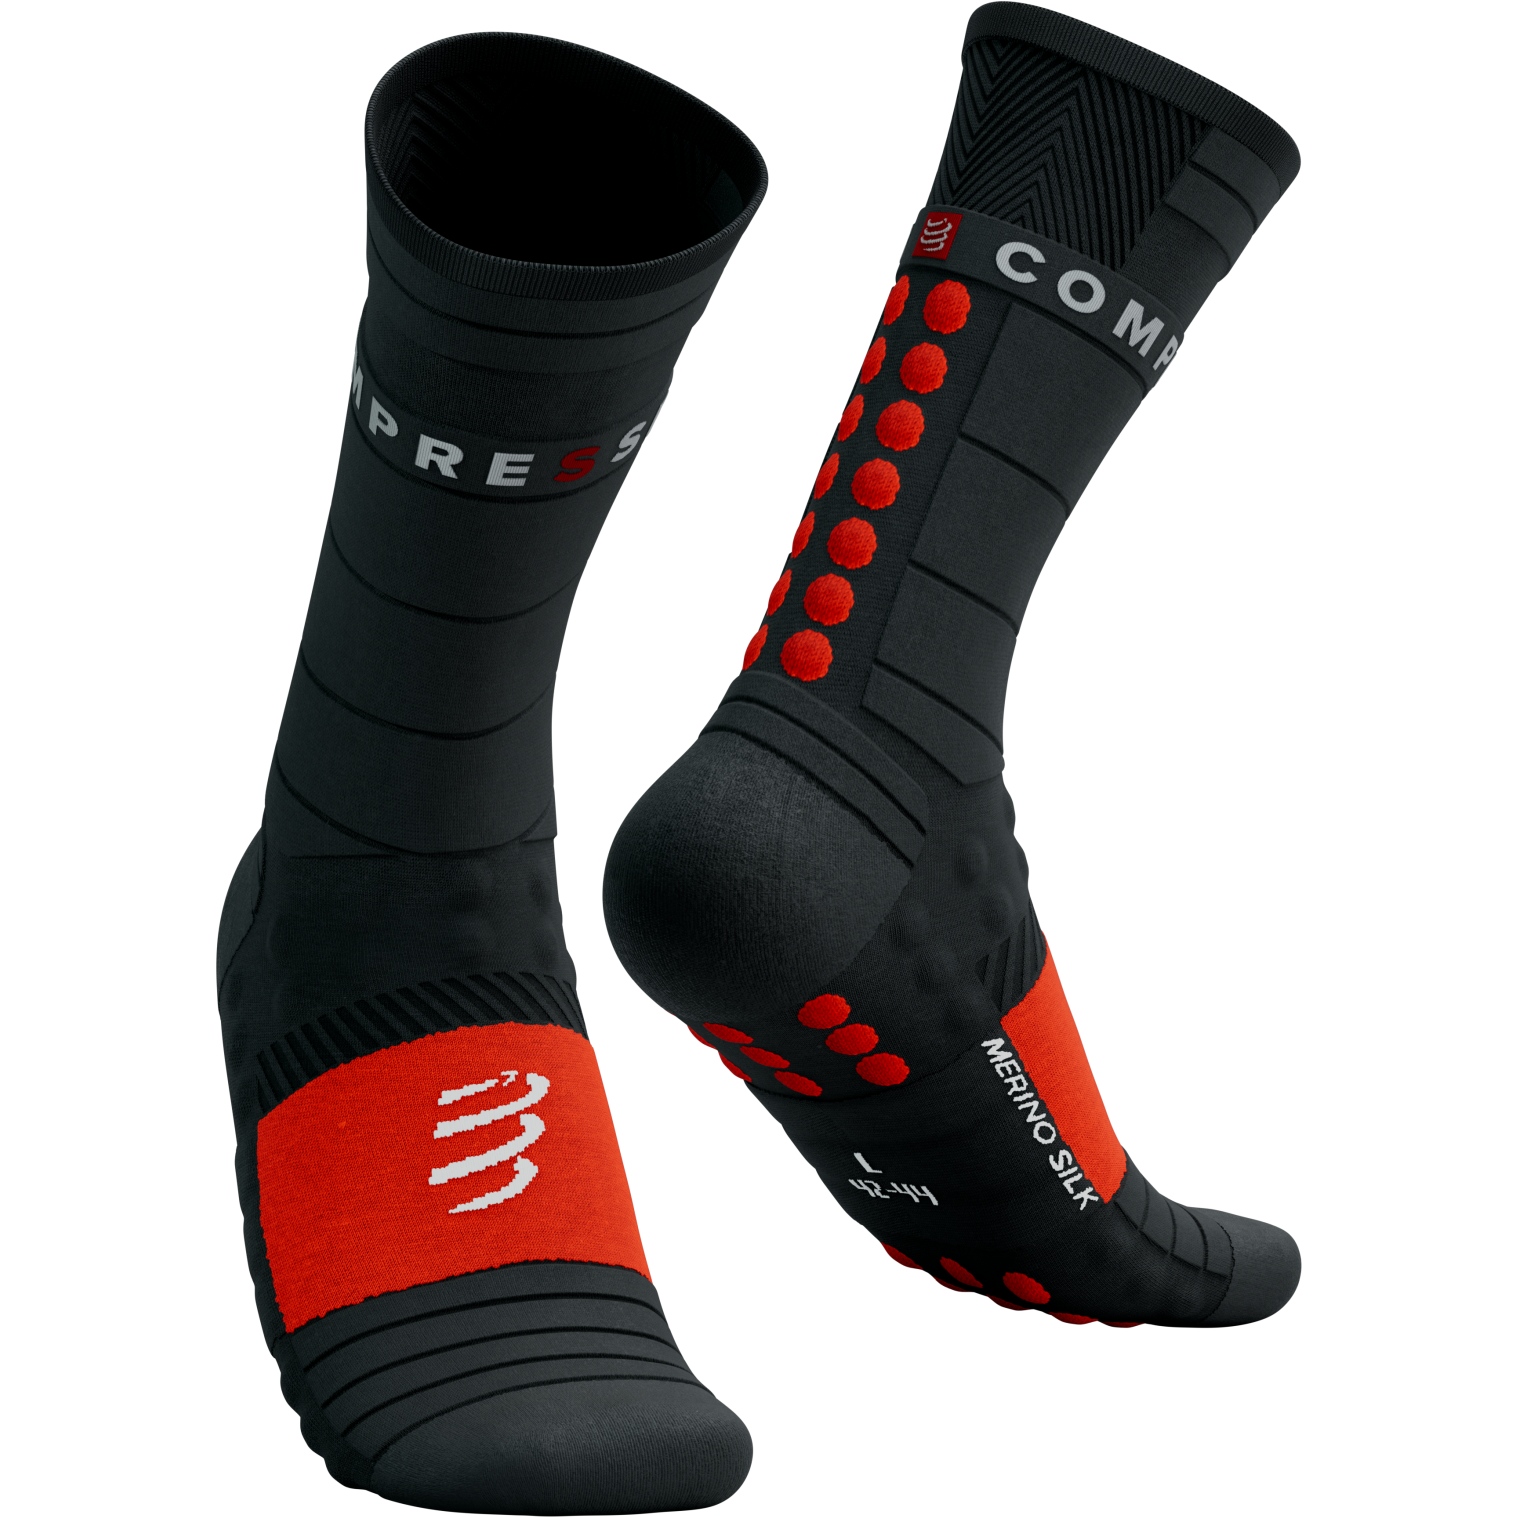 Picture of Compressport Pro Racing Compression Socks Winter Run - black/high risk red